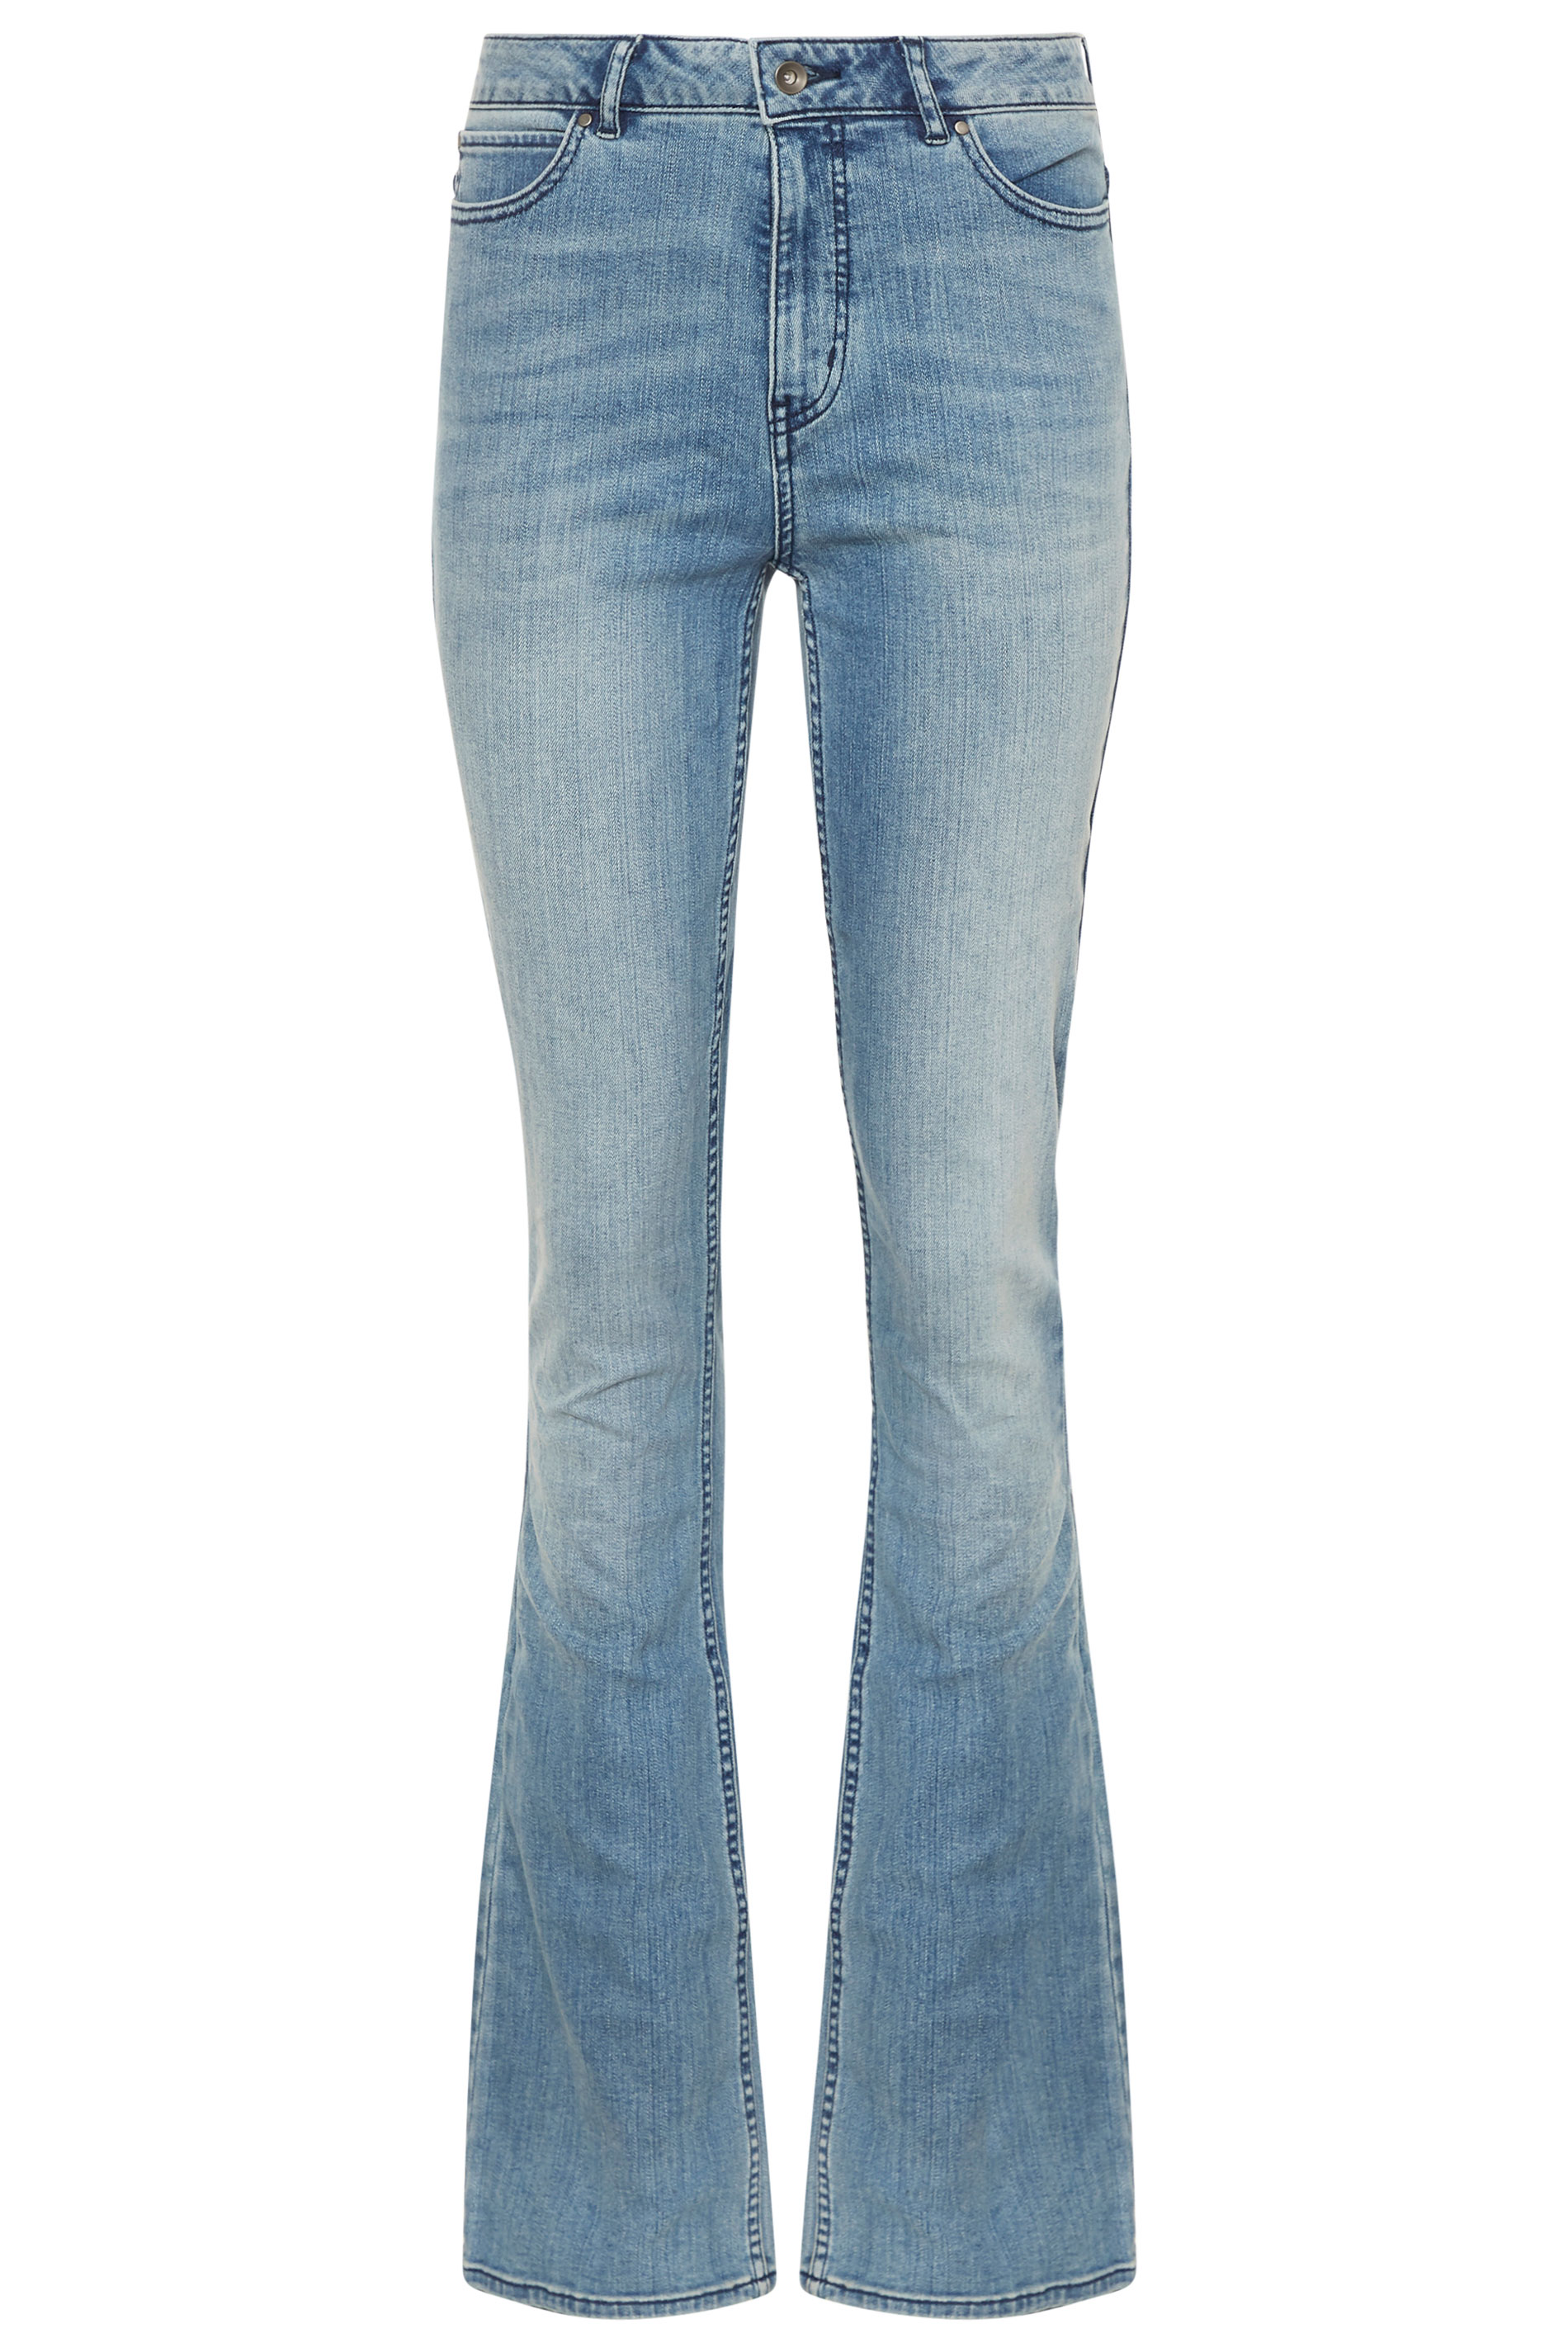 Mid Blue Premium Baby Bootcut Jeans | Long Tall Sally